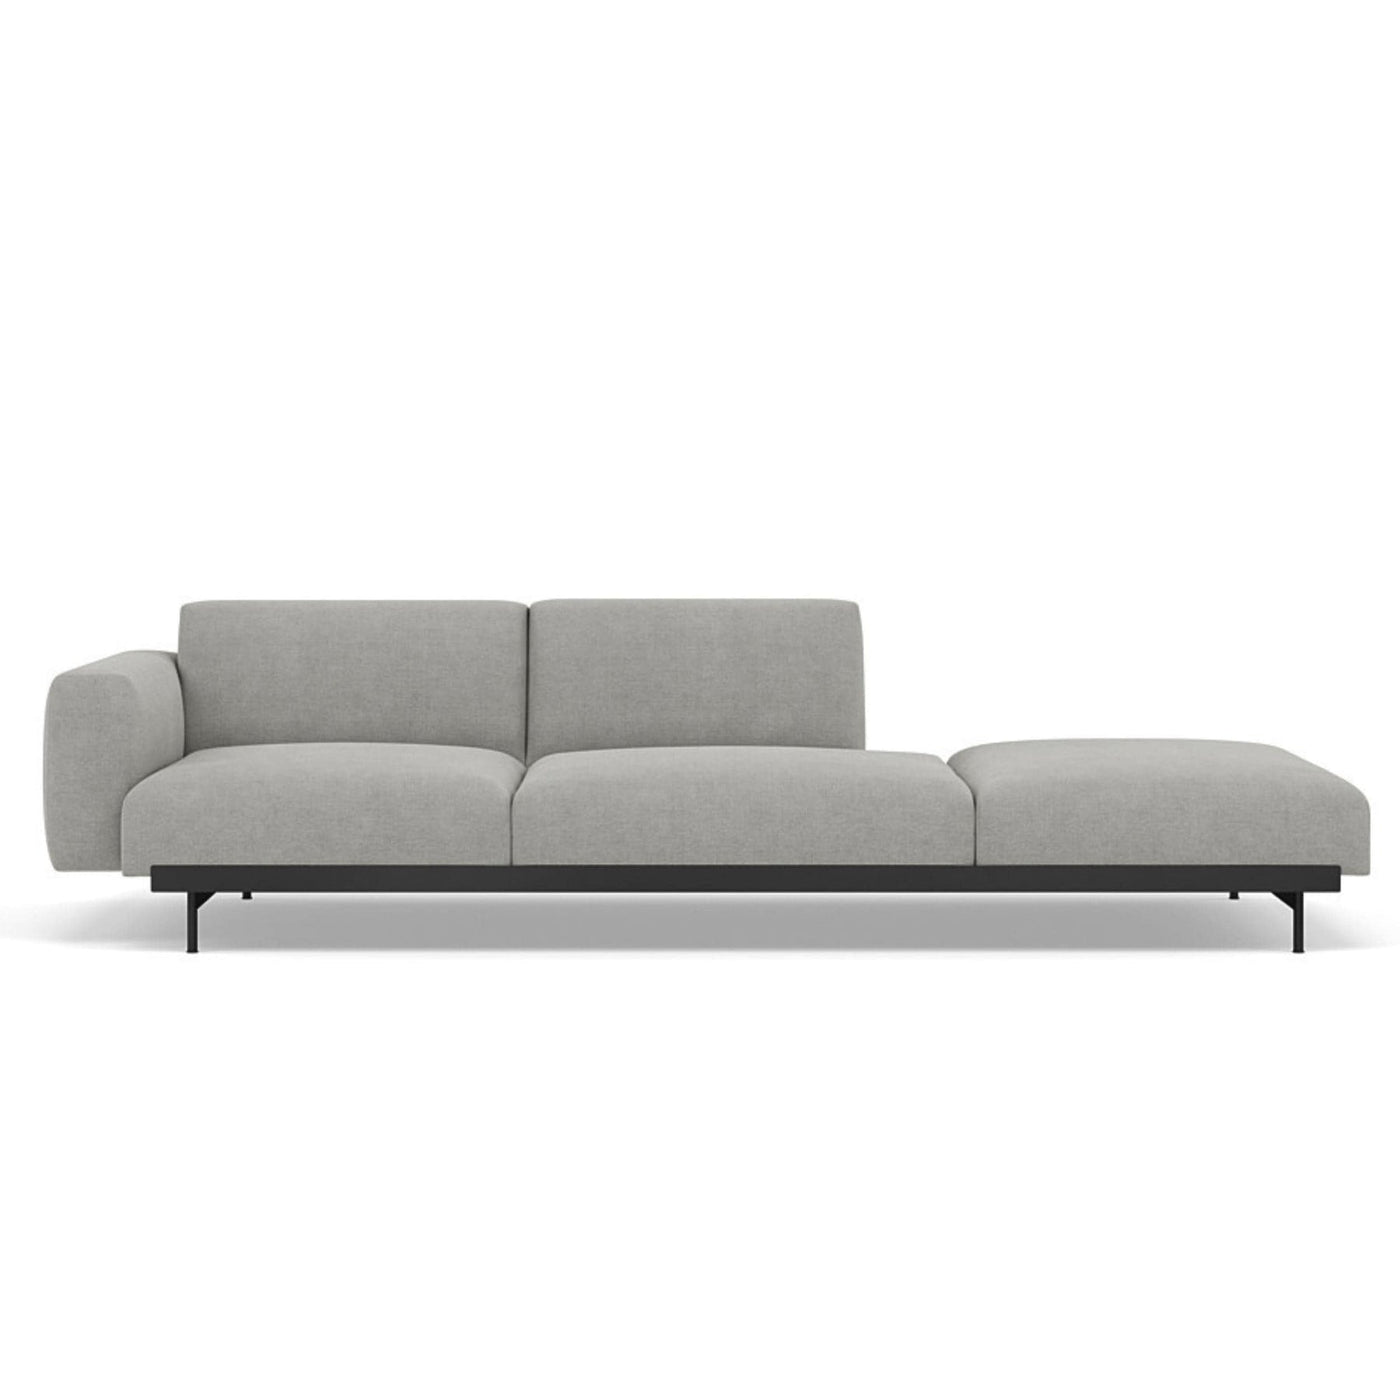 Muuto In Situ Modular 3 Seater Sofa, configuration 5. Made to order from someday designs. #colour_fiord-151